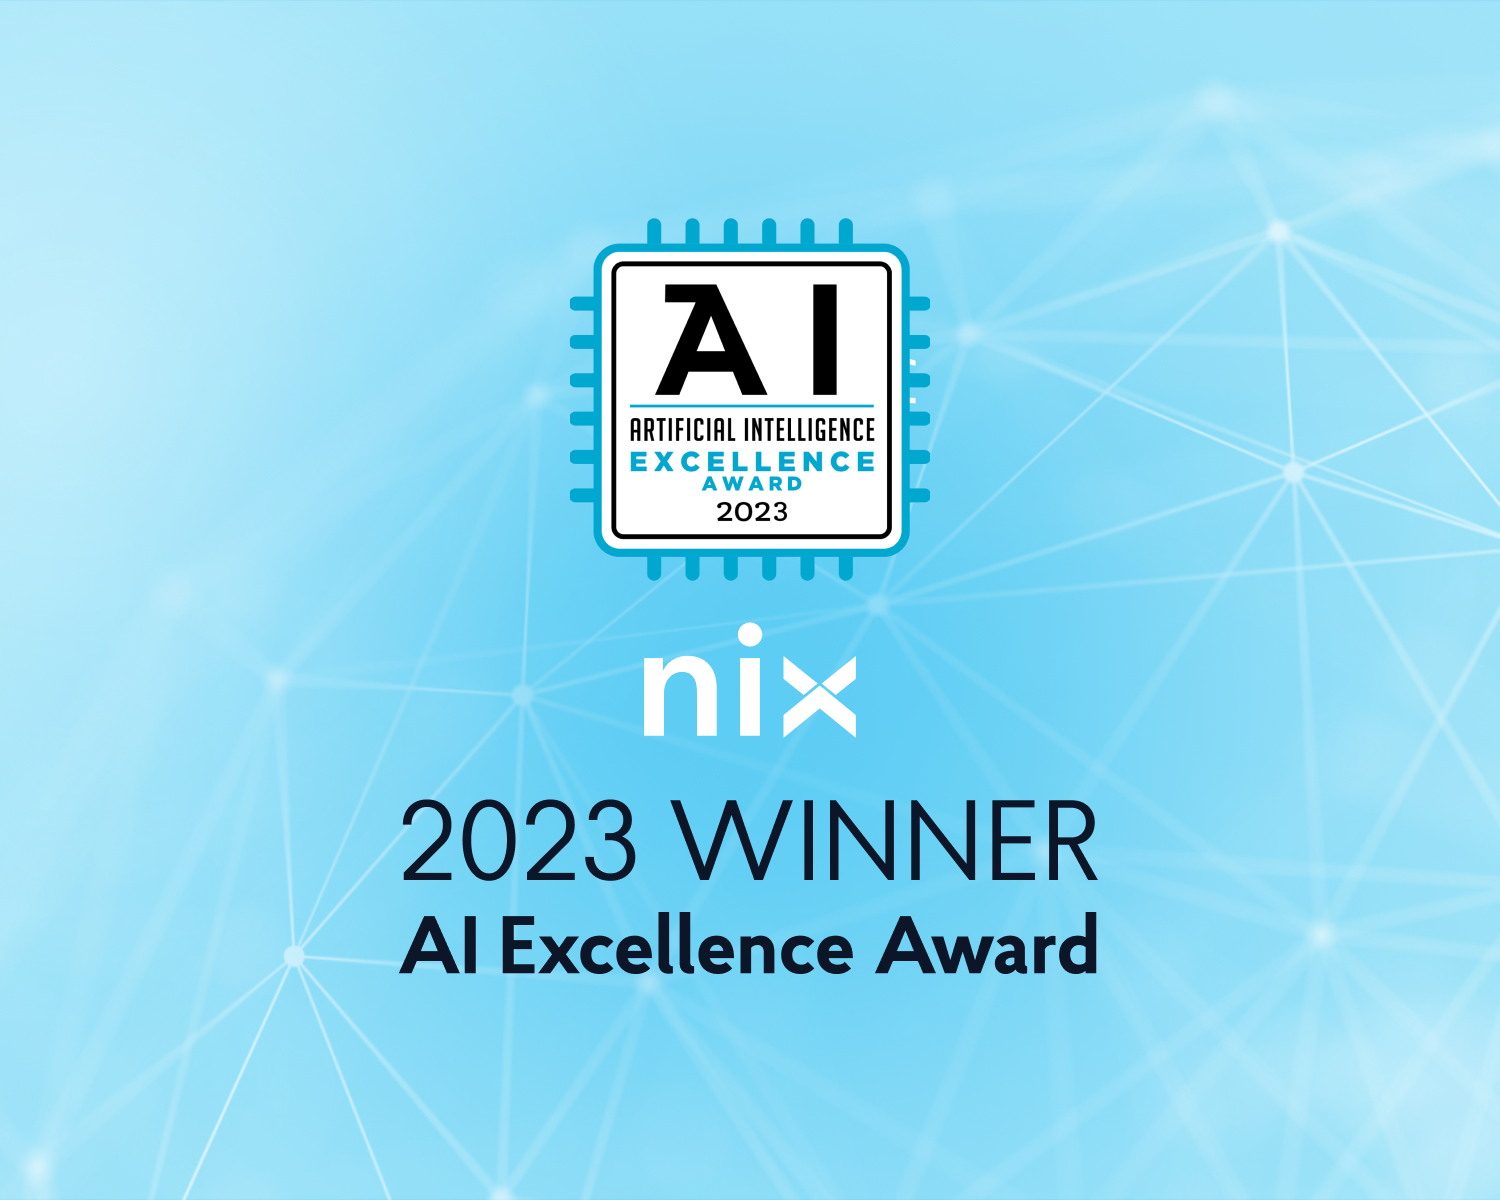 NIX Becomes 2023 Artificial Intelligence Excellence Award Winner